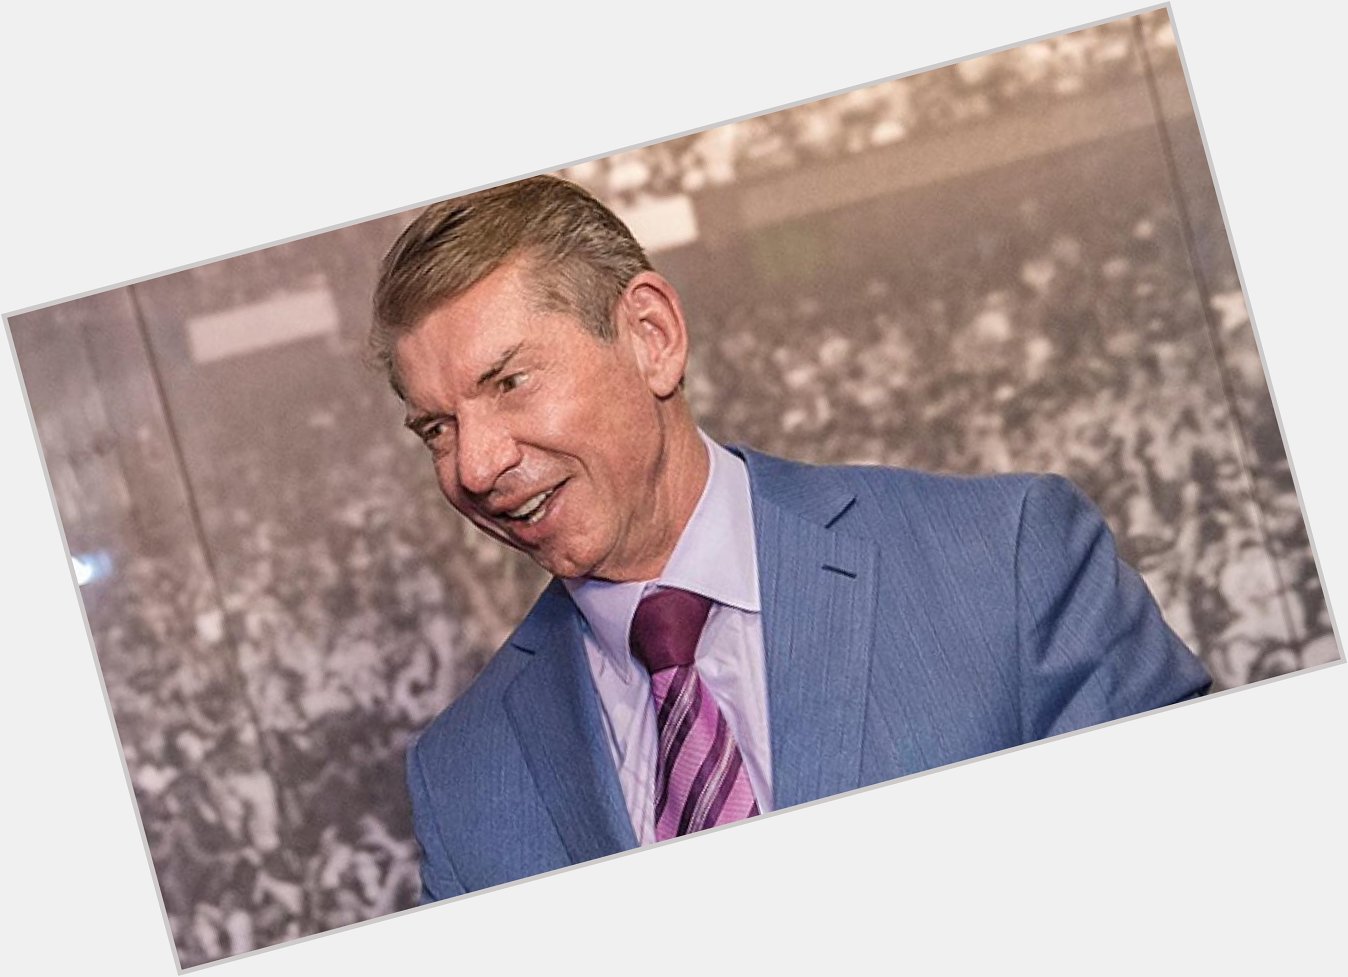 WWE s The Bump to Stream This Weekend, Vince McMahon Wishes Randy Orton a Happy Birthday  